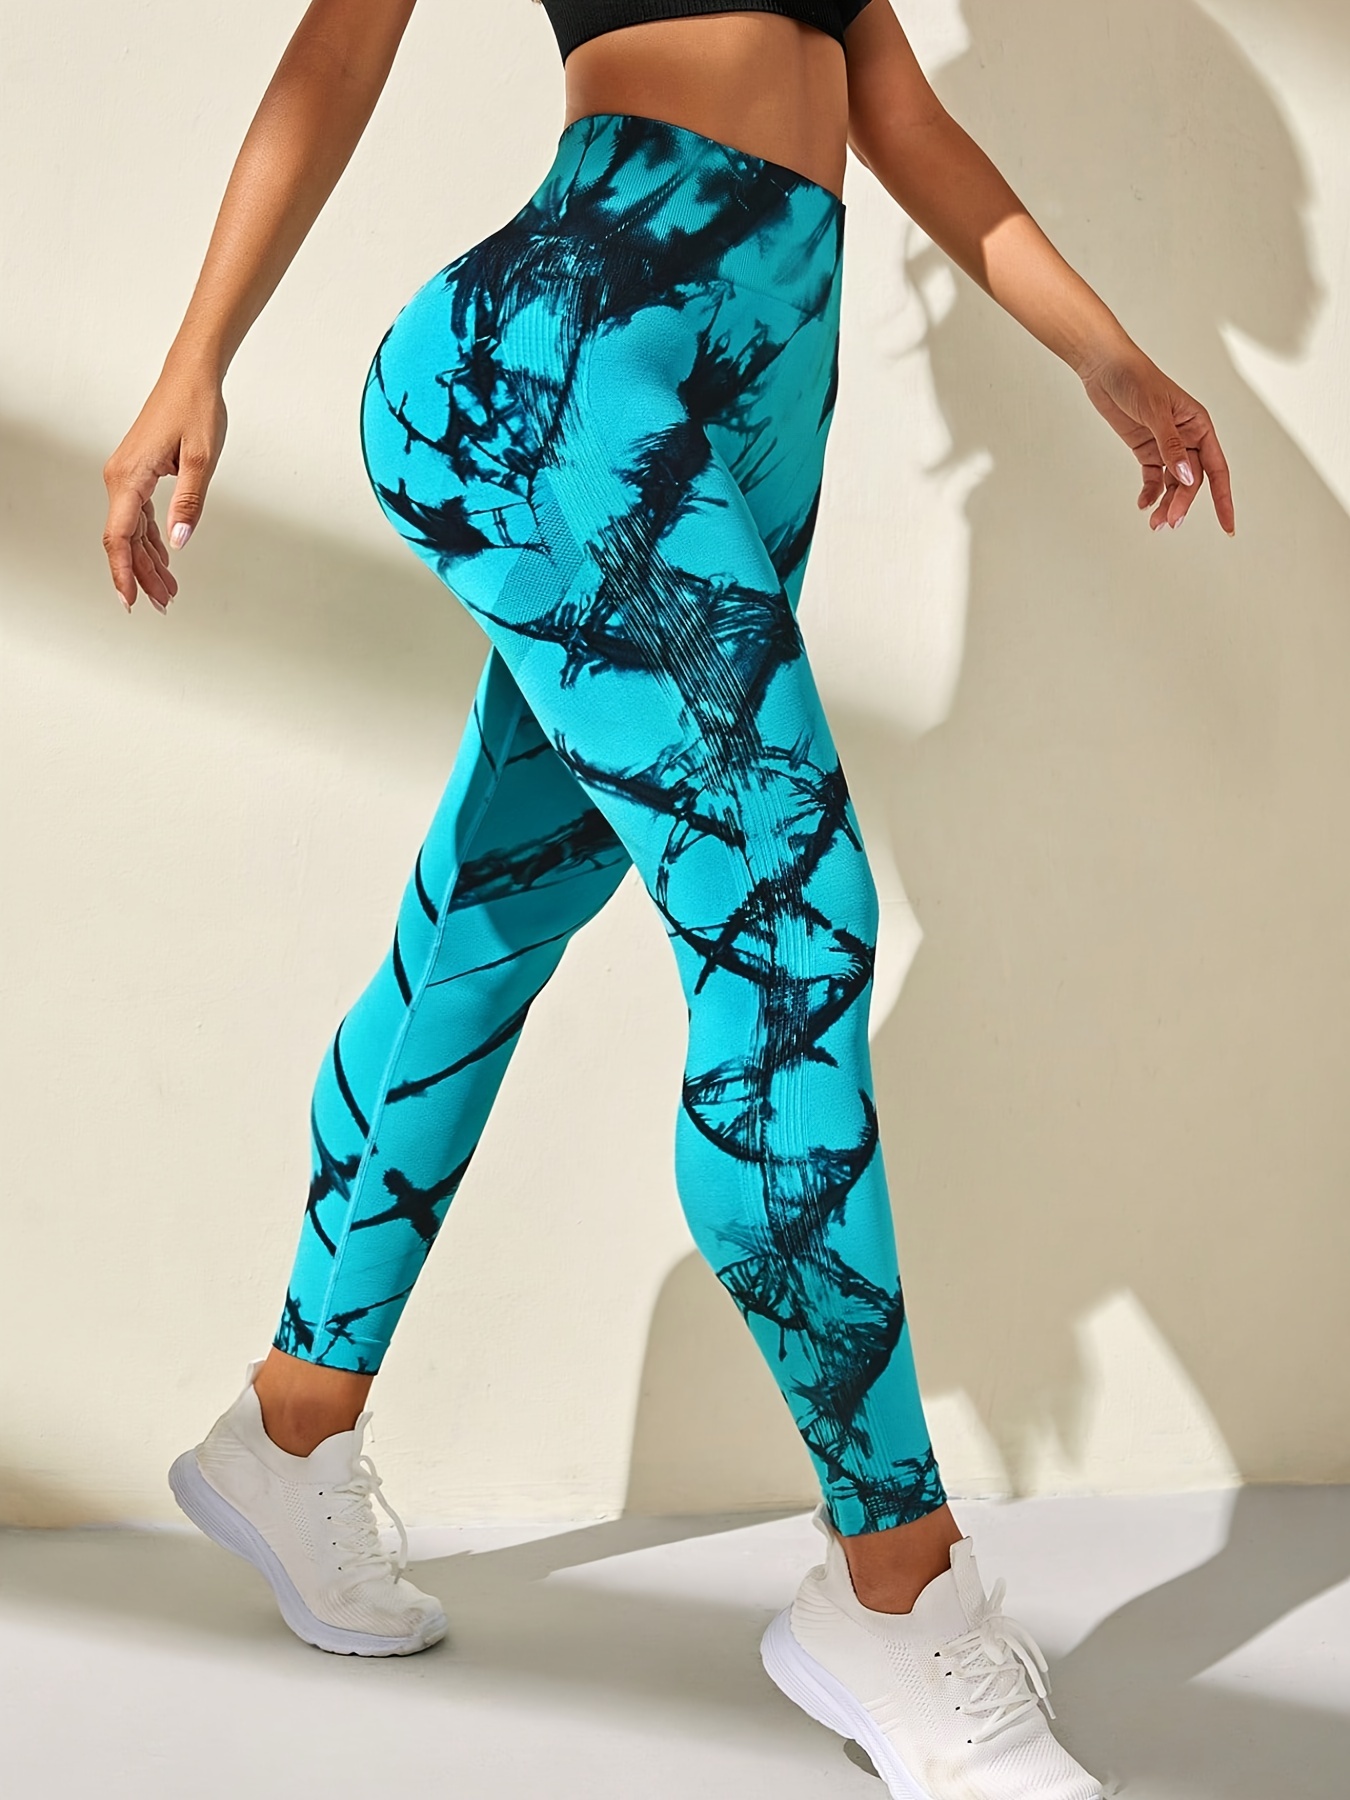 Yoga Trendy Tie Dye Yoga Leggings M-shaped Seam Booty Sculpt Wide Waistband  Sports Leggings With Side Pocket for Sale New Zealand, New Collection  Online